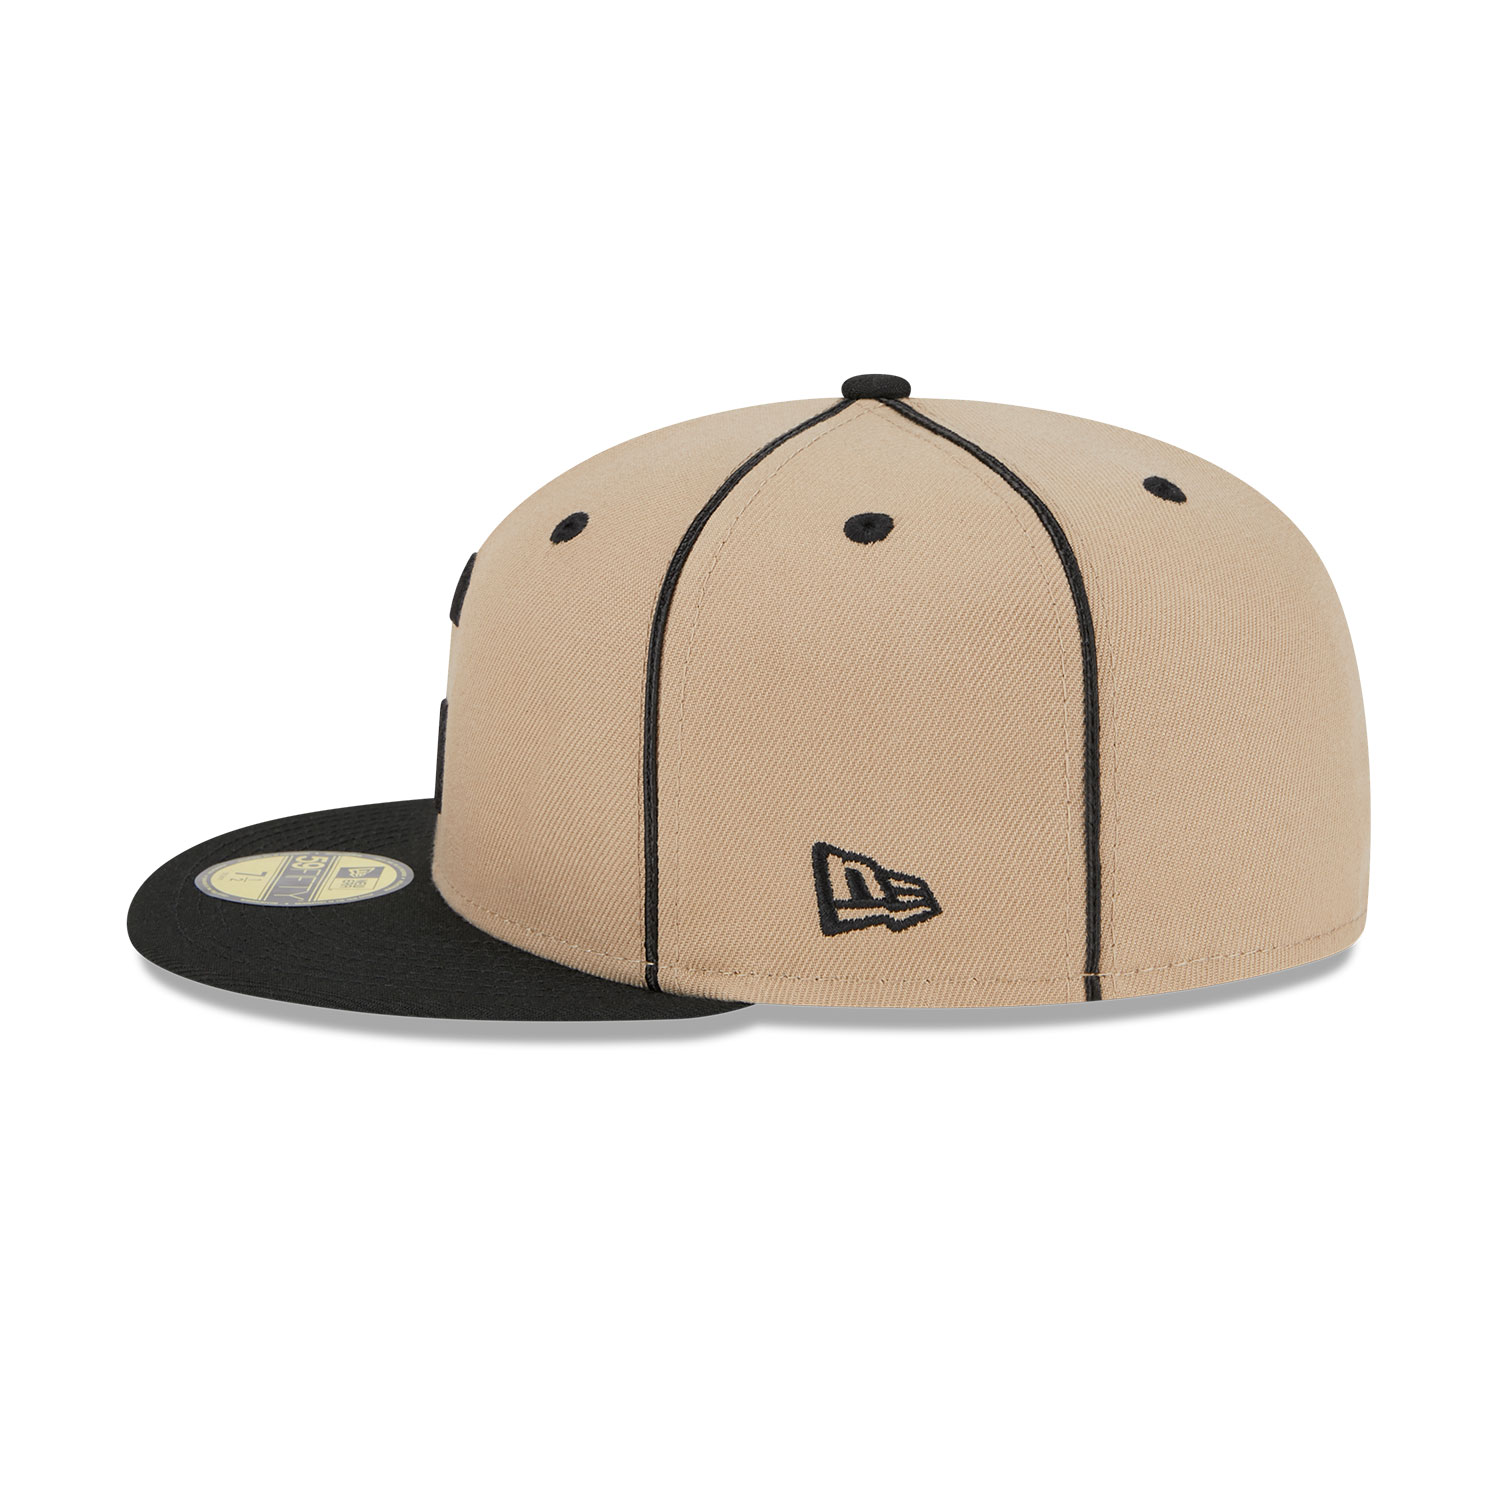 Homestead Grays Negro League Beige 59FIFTY Fitted Cap